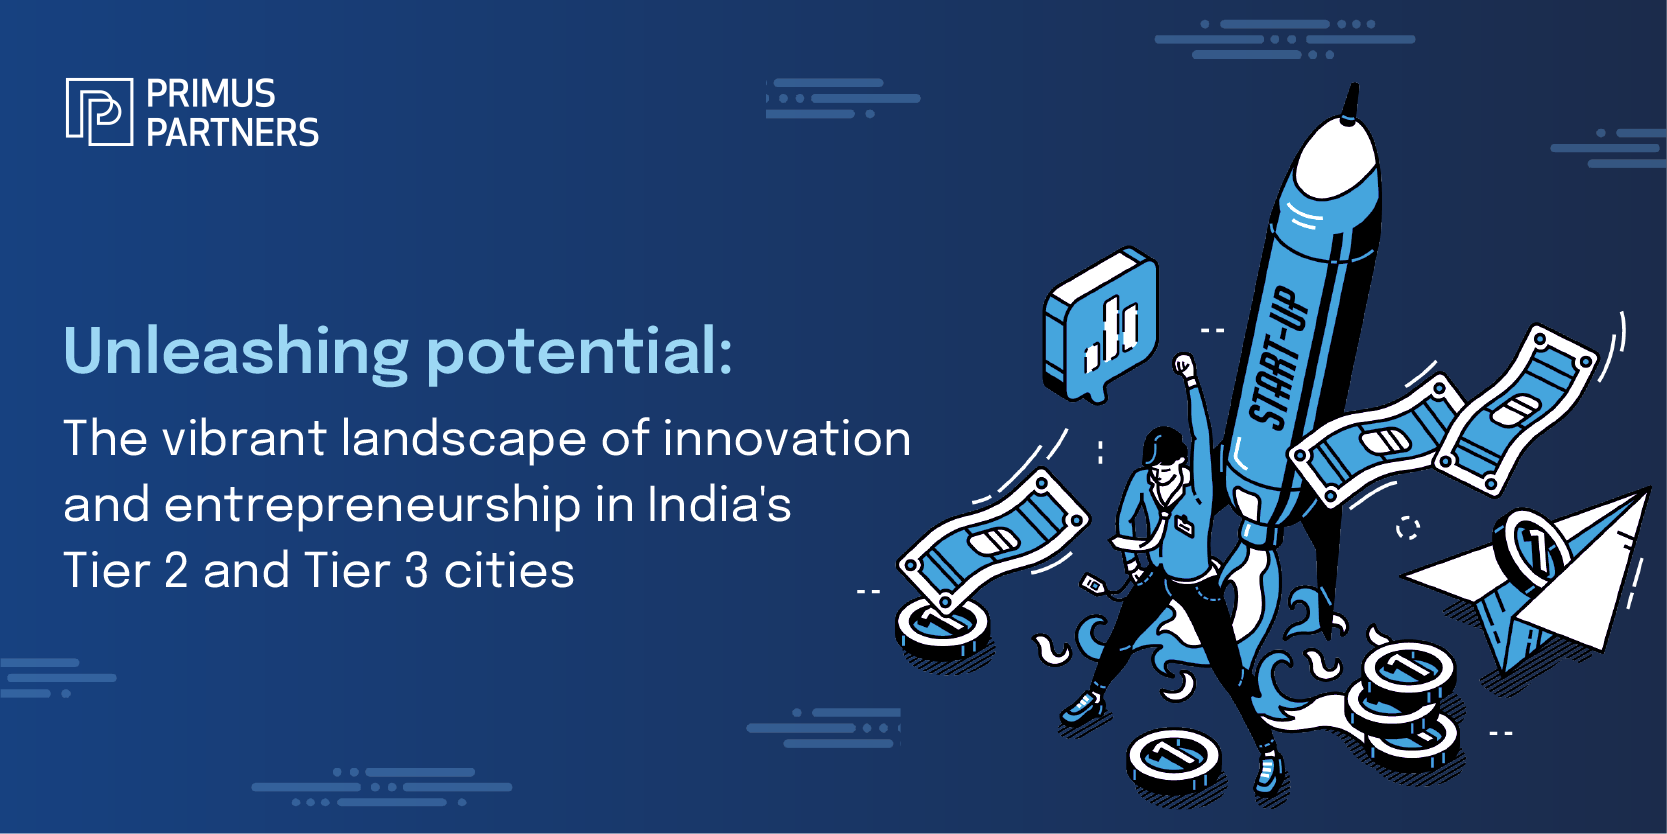 Unleashing potential: The vibrant landscape of innovation and entrepreneurship in India's Tier 2 and Tier 3 cities